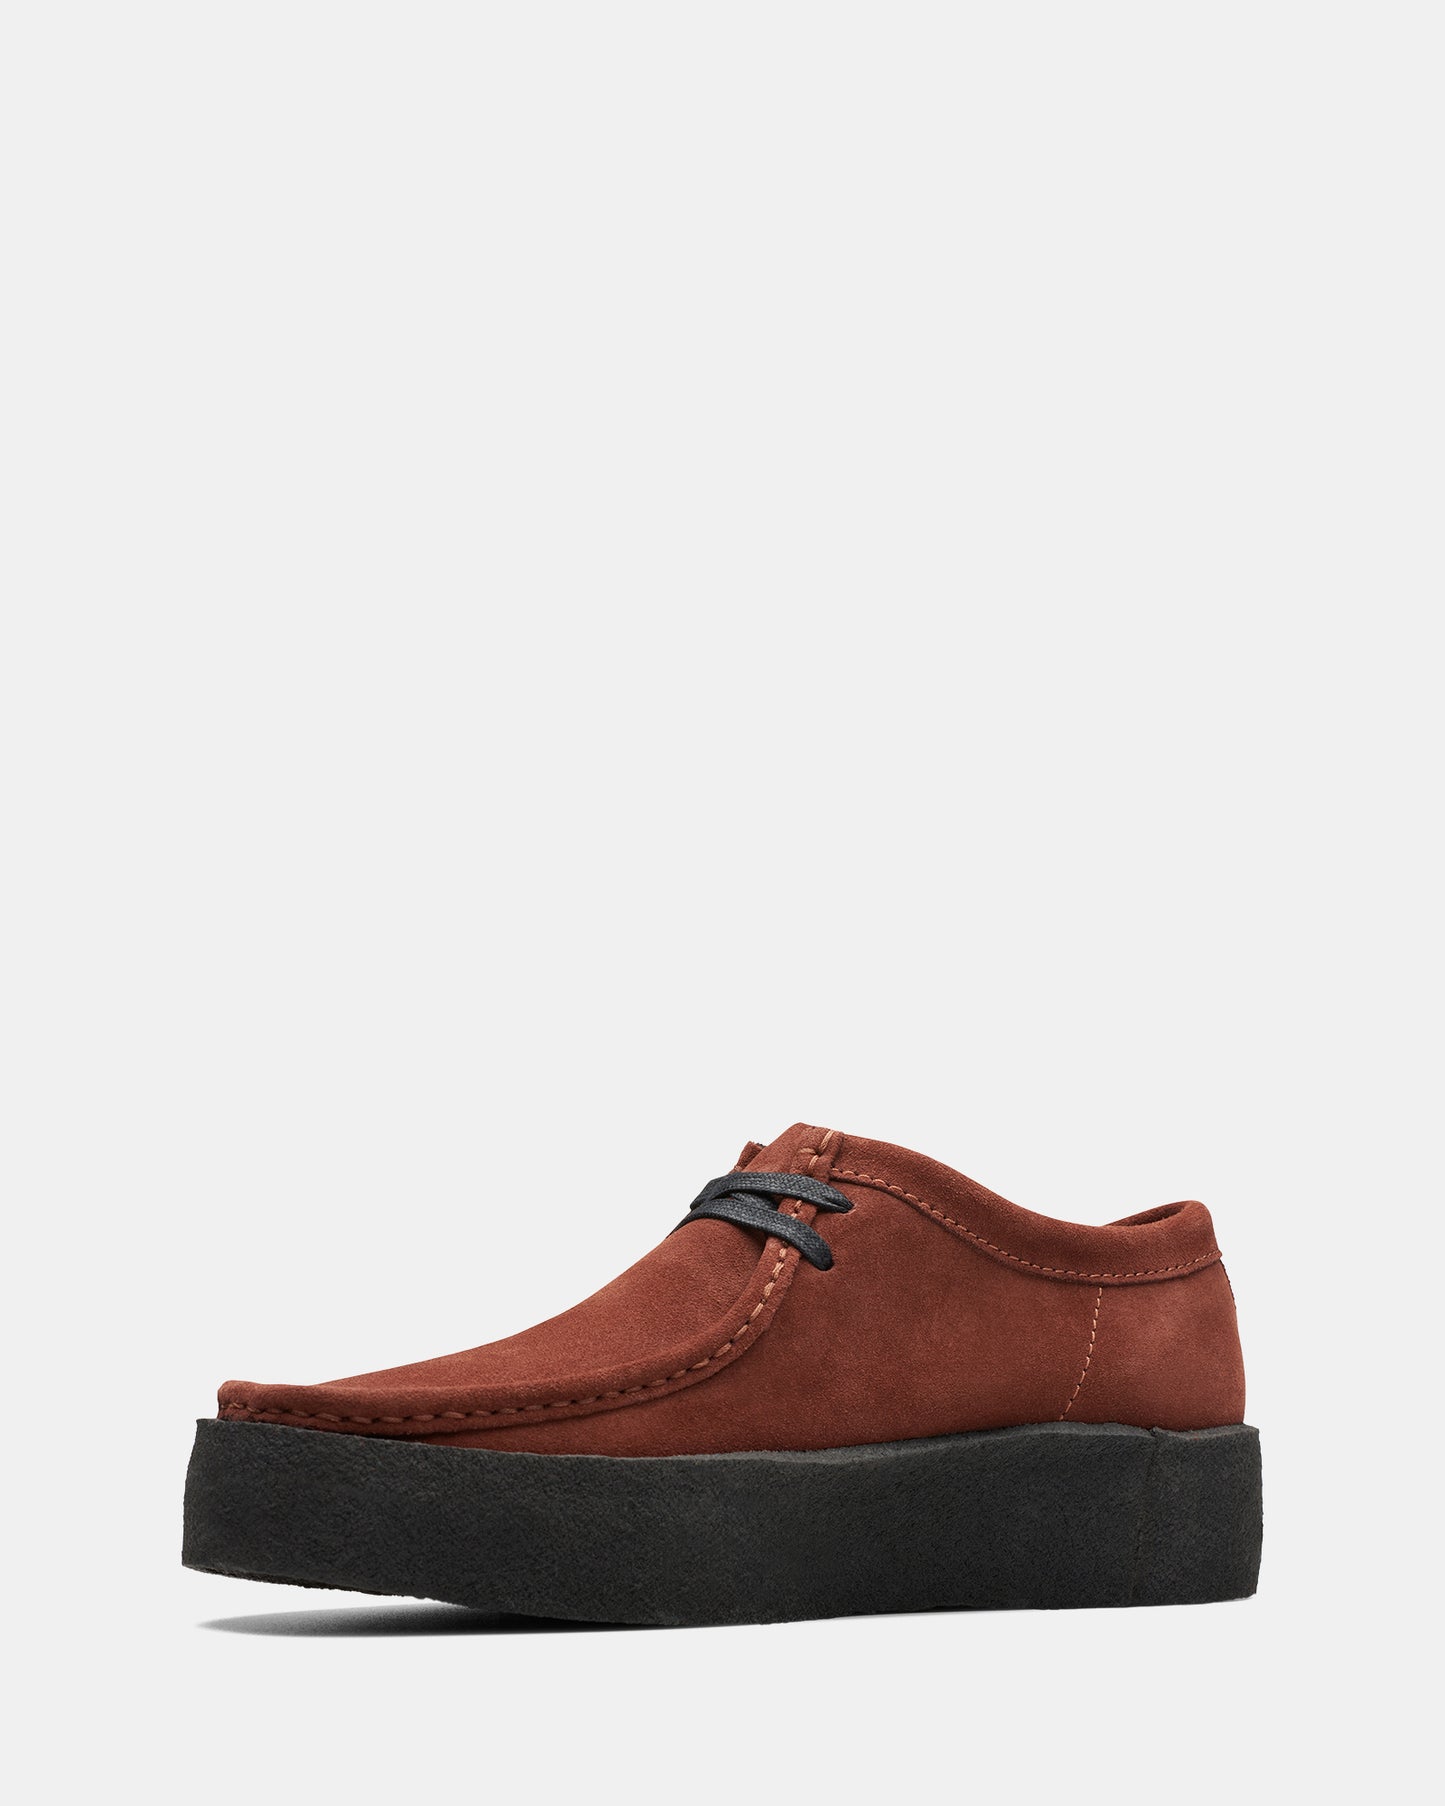 Wallabee Cup (M) Rust Suede